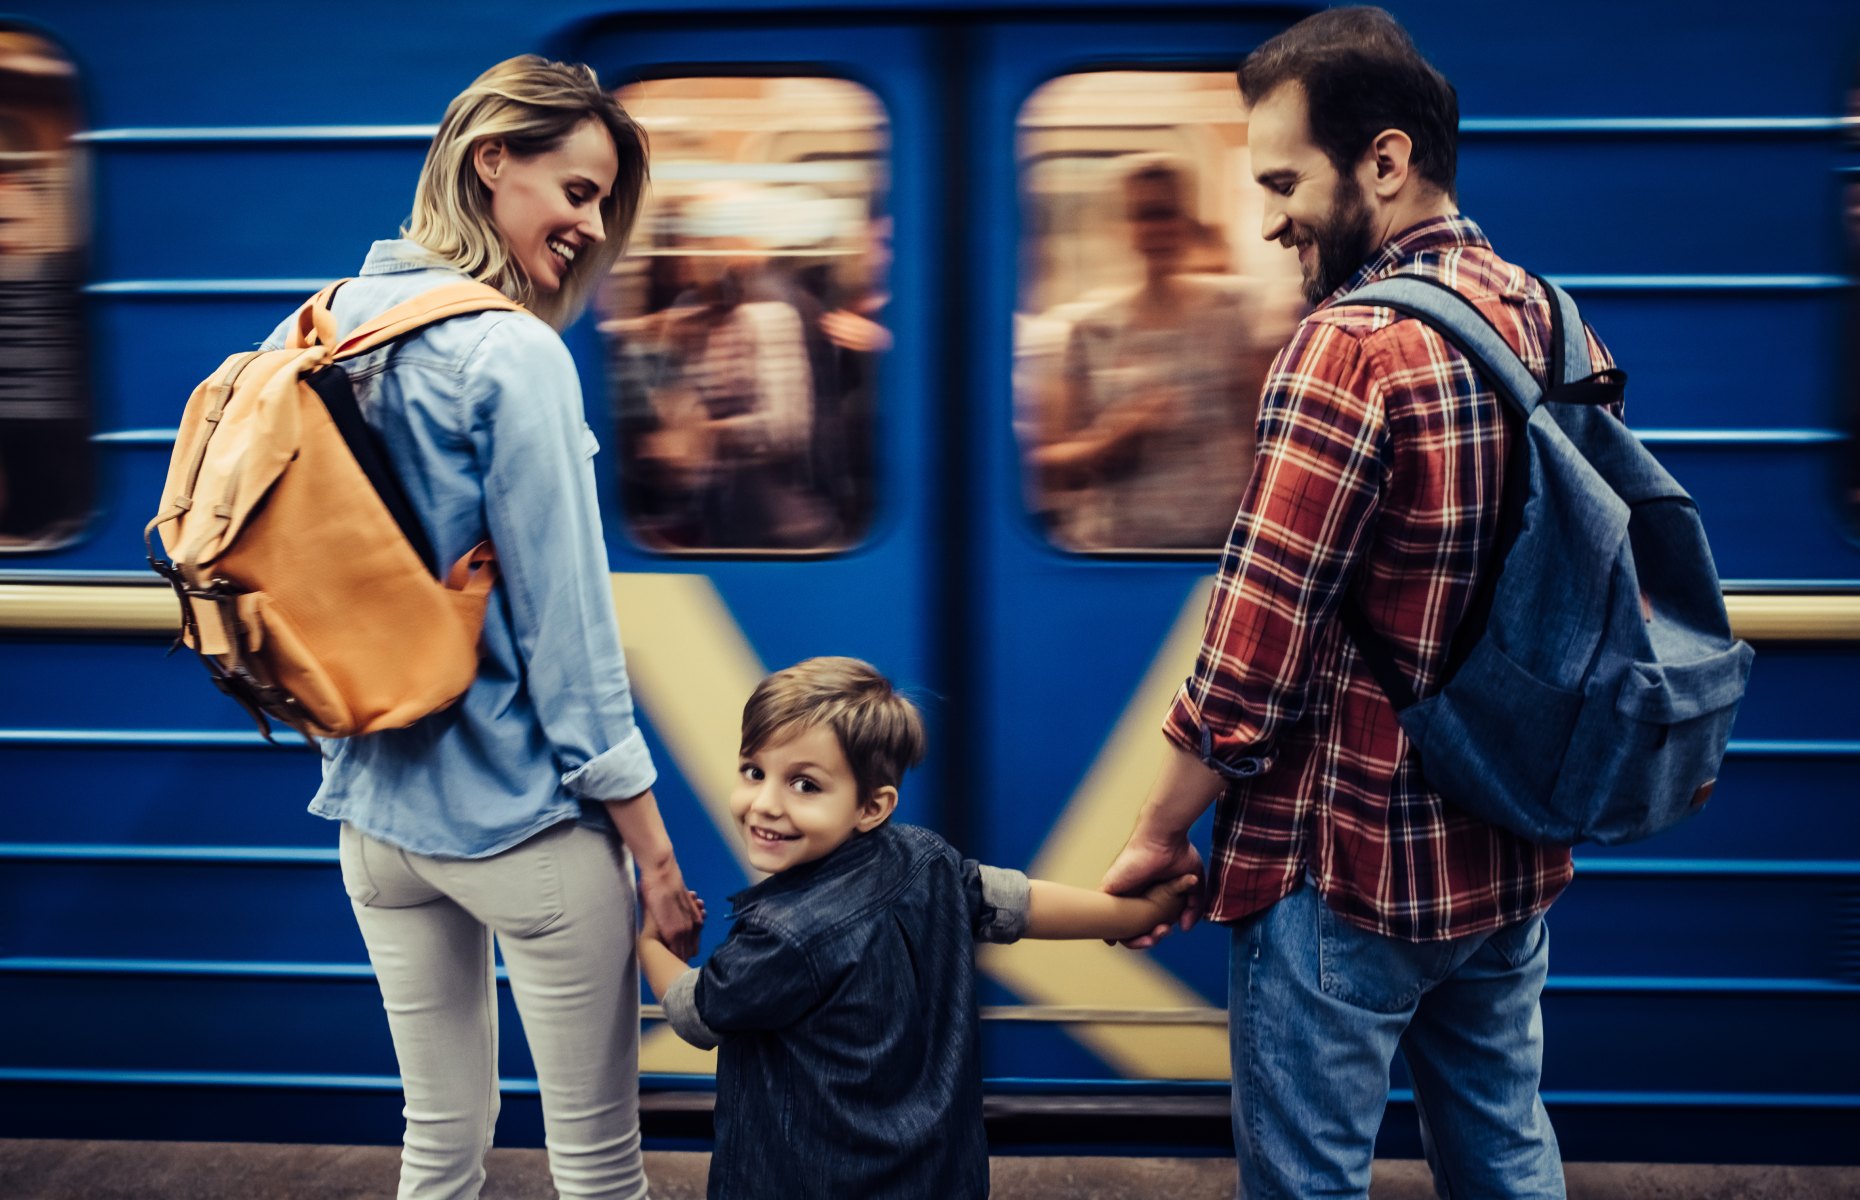 Family of three boarding a train together (Image: 4 PM production/Shutterstock)